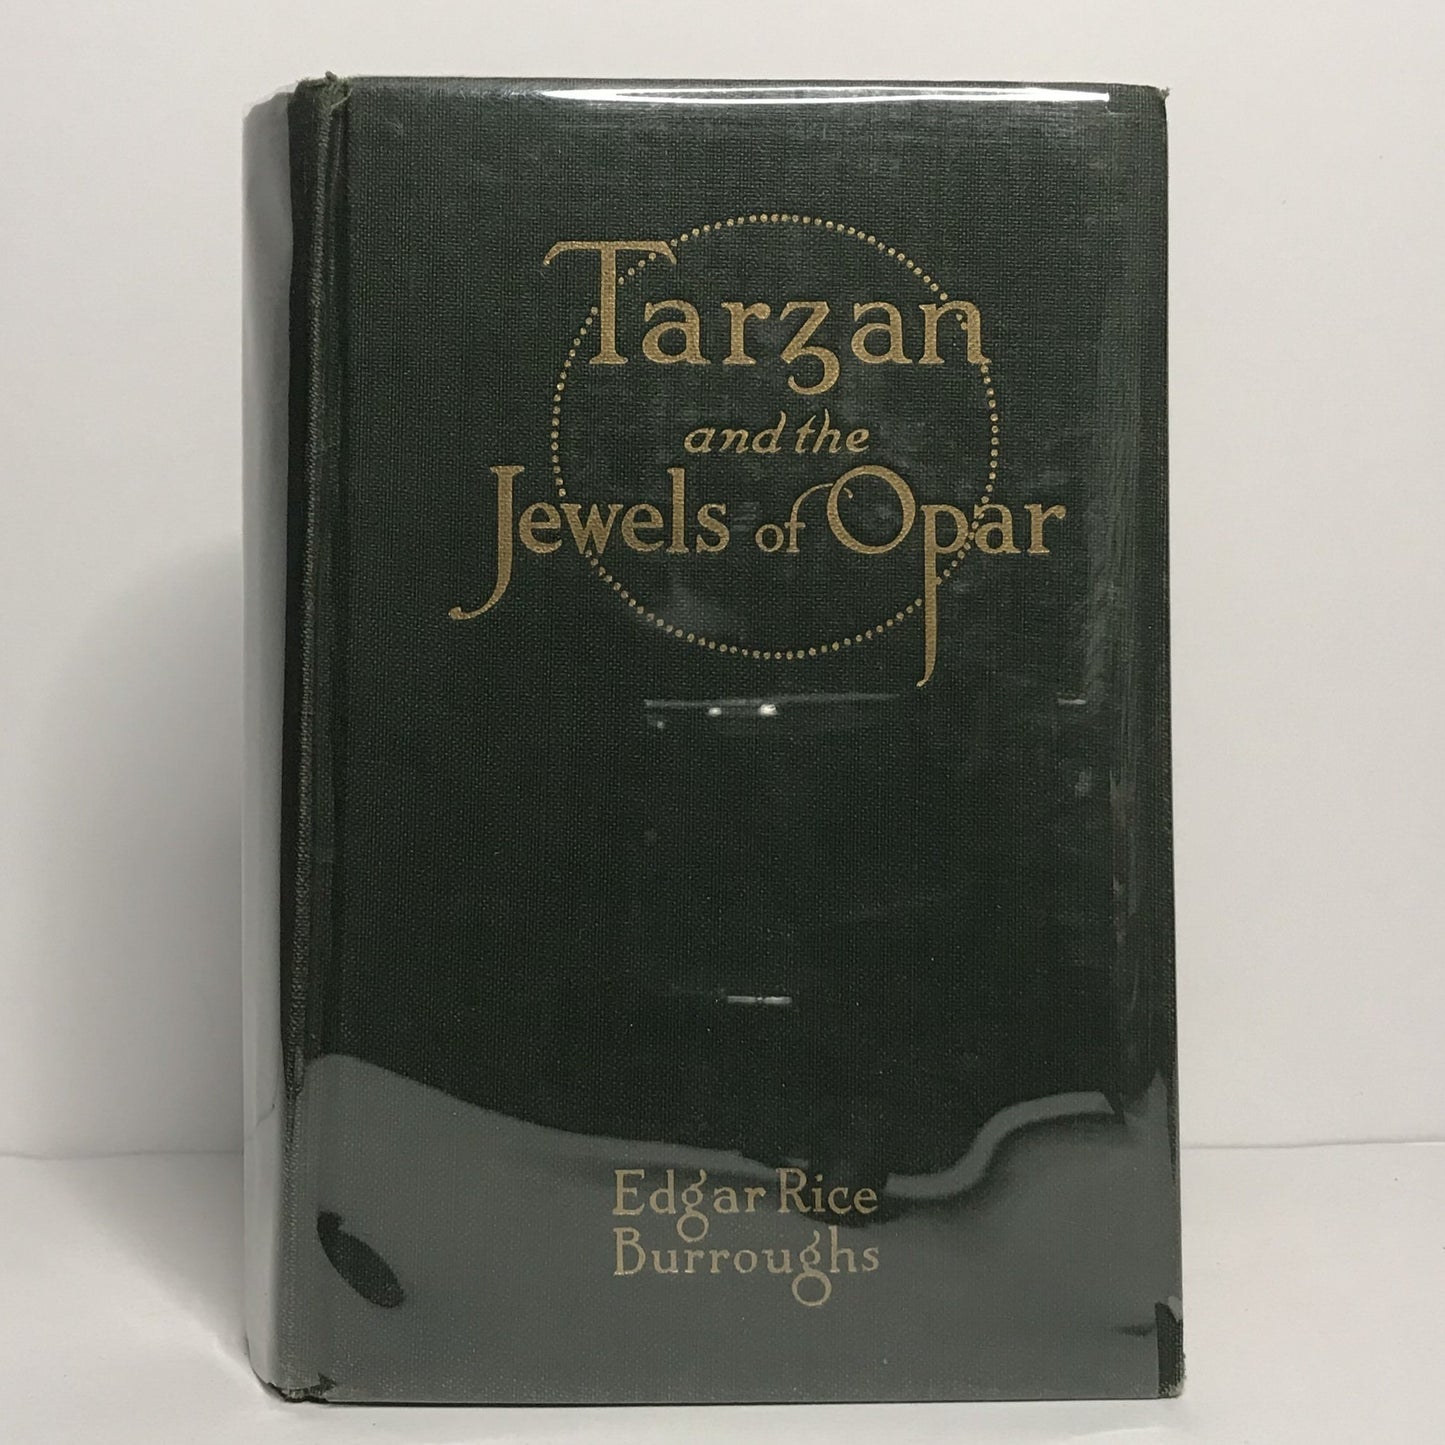 Tarzan and the Jewels of Opar - Edgar Rice Burroughs - 1st Edition